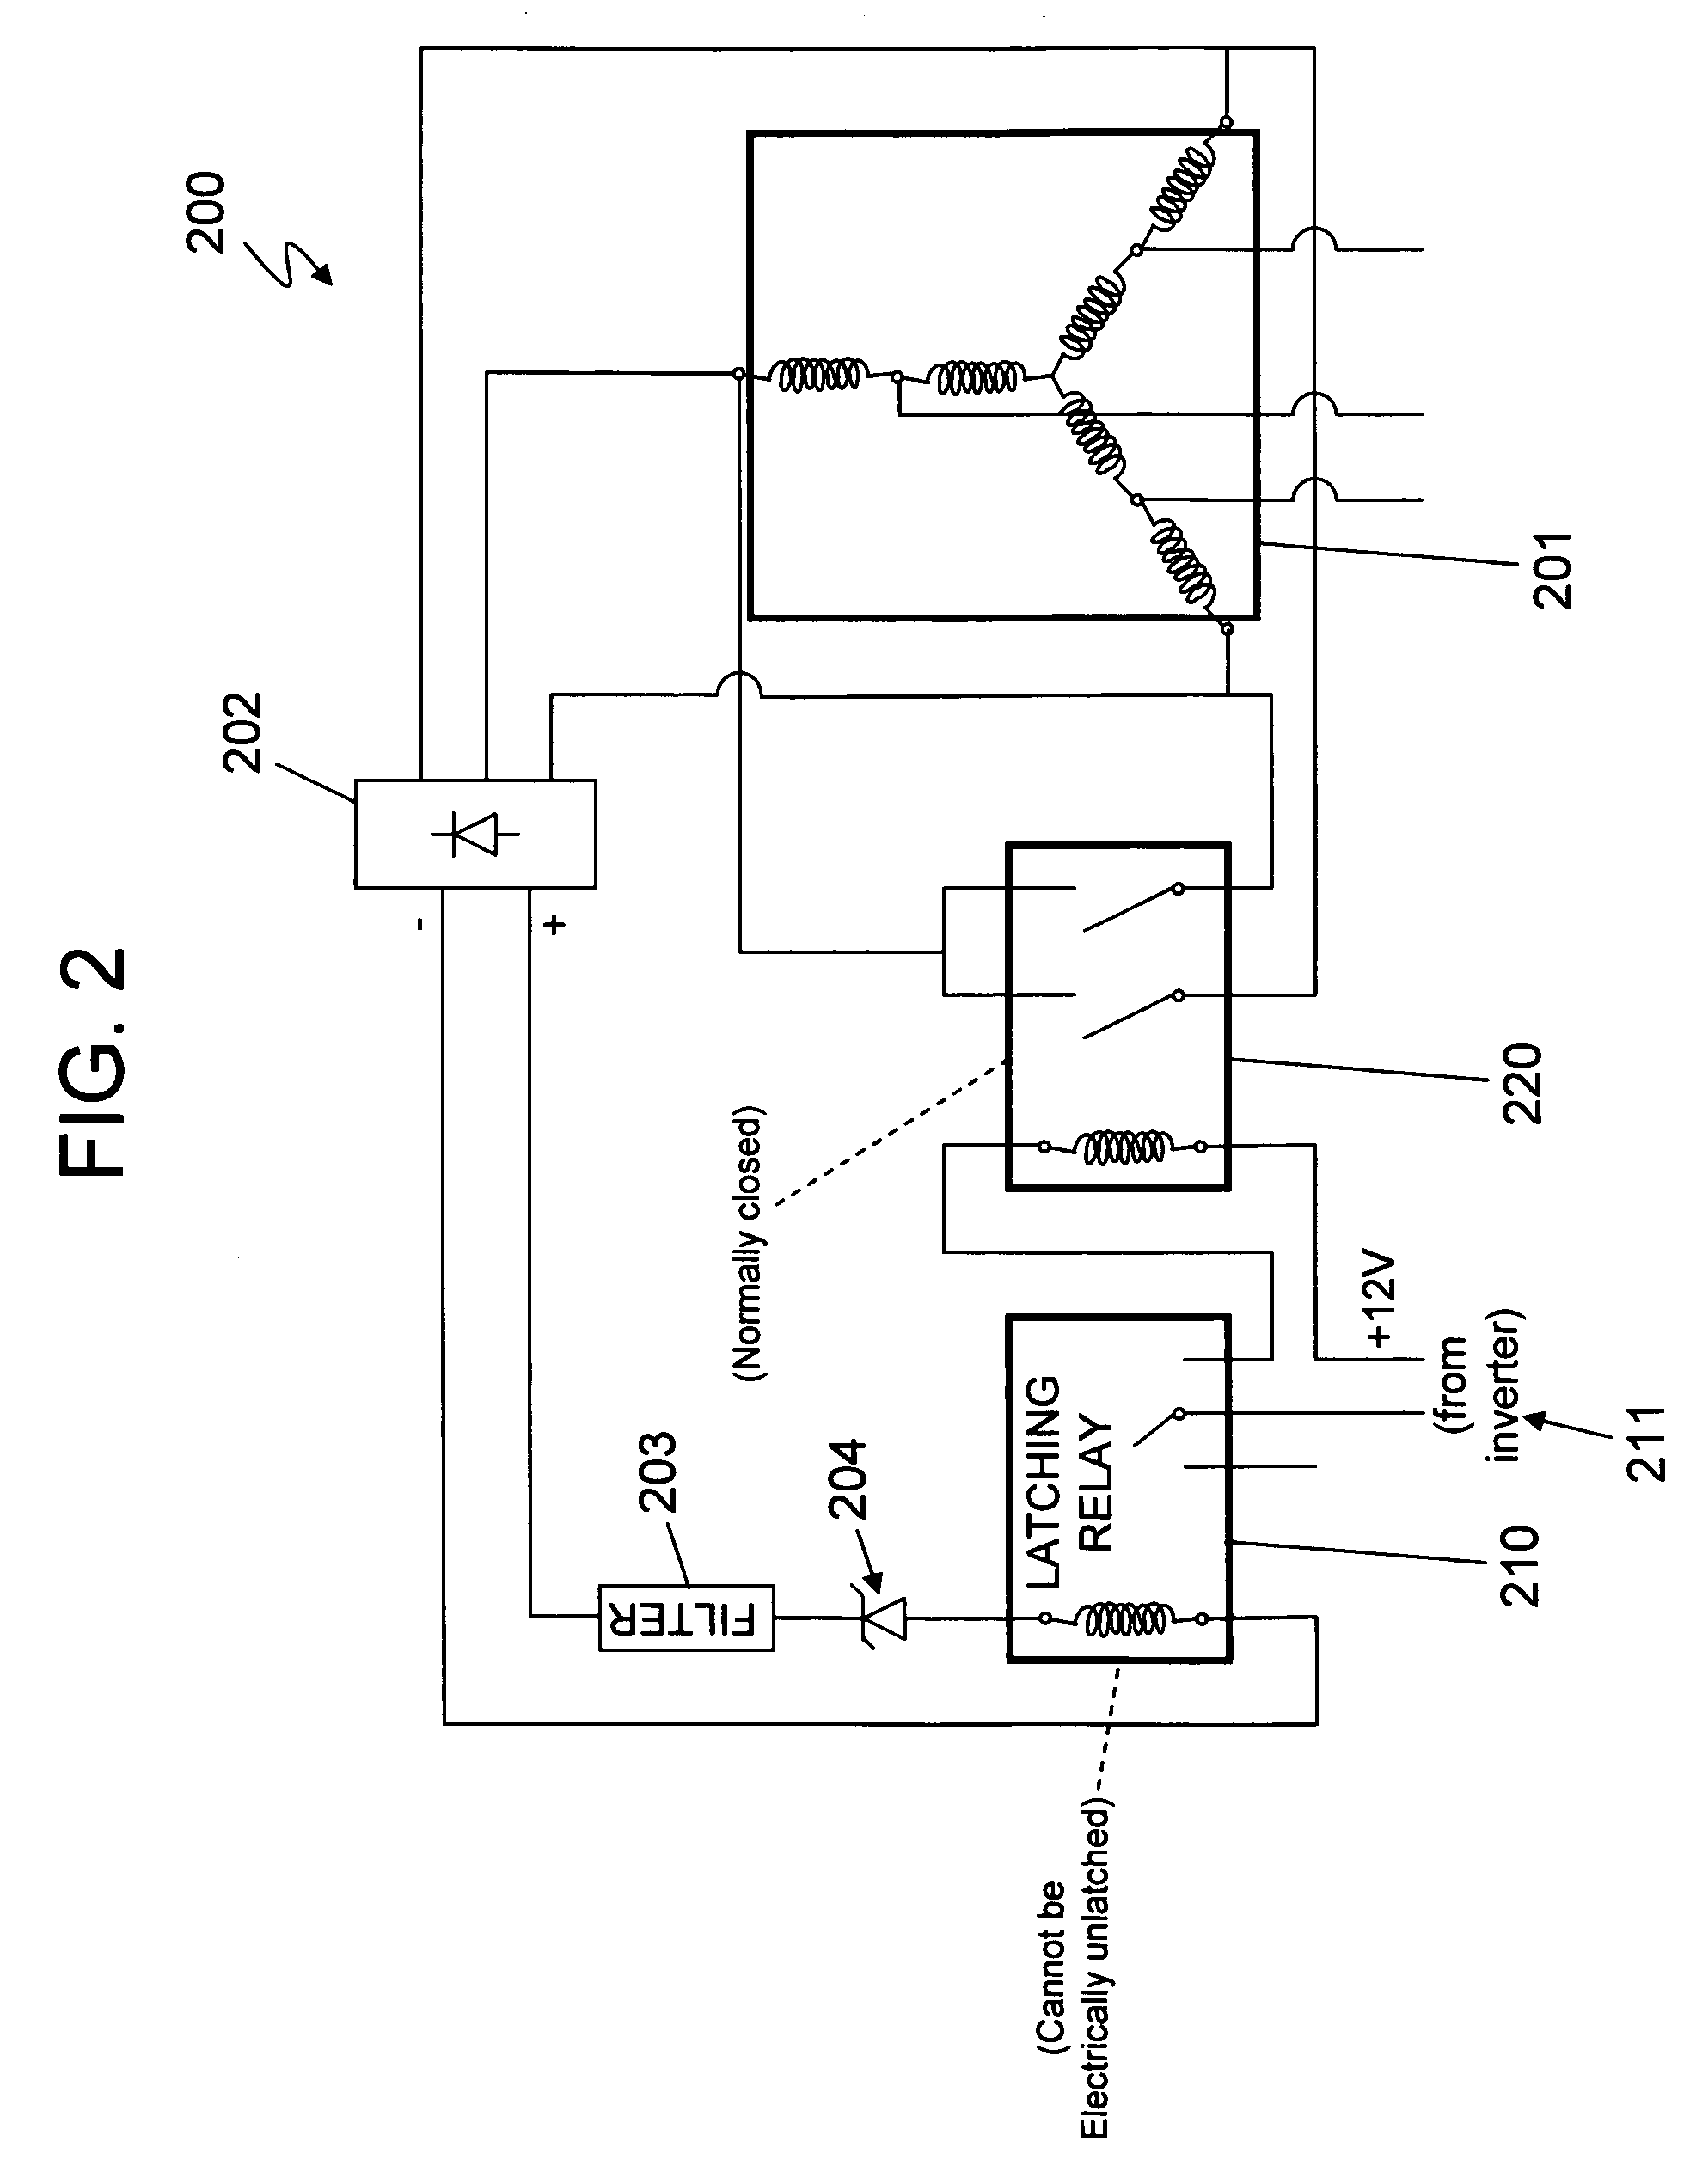 Stall controller and triggering condition control features for a wind turbine